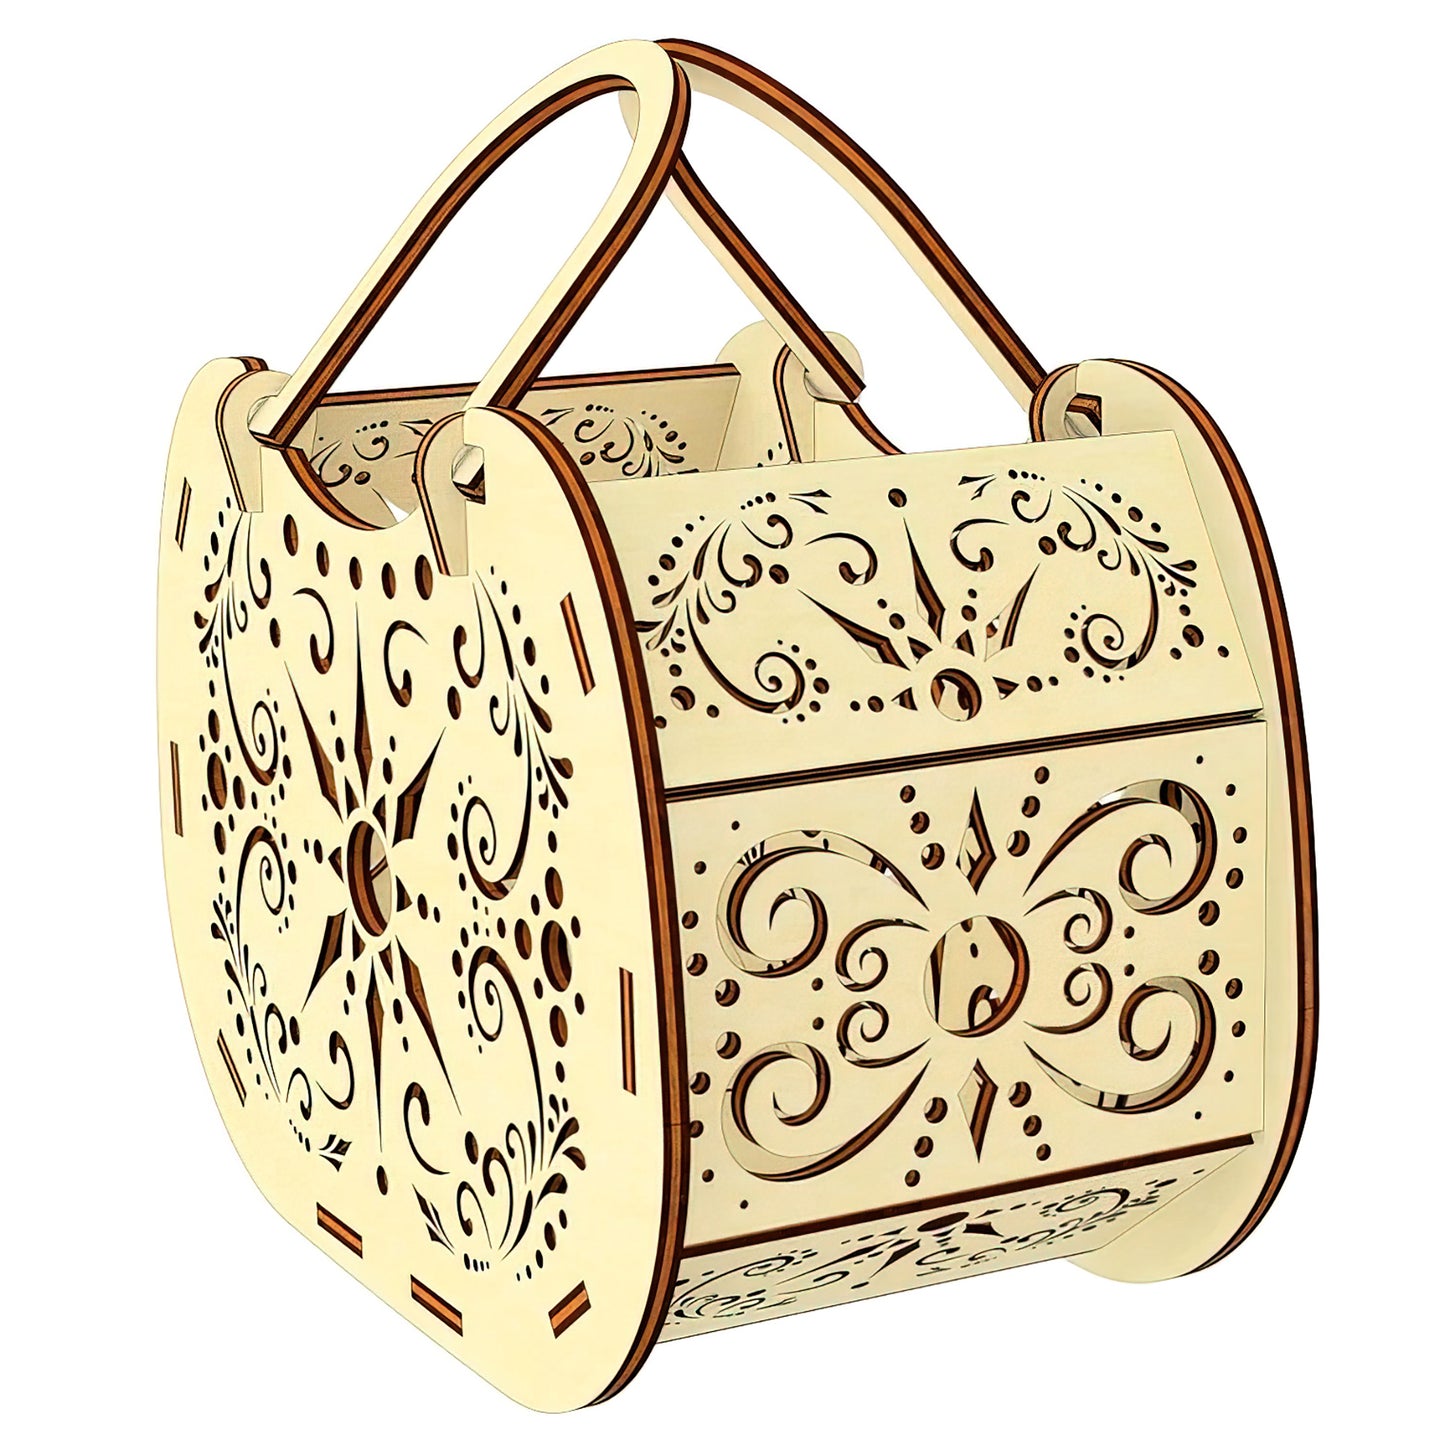 Stylized Ornate Basket with Handles